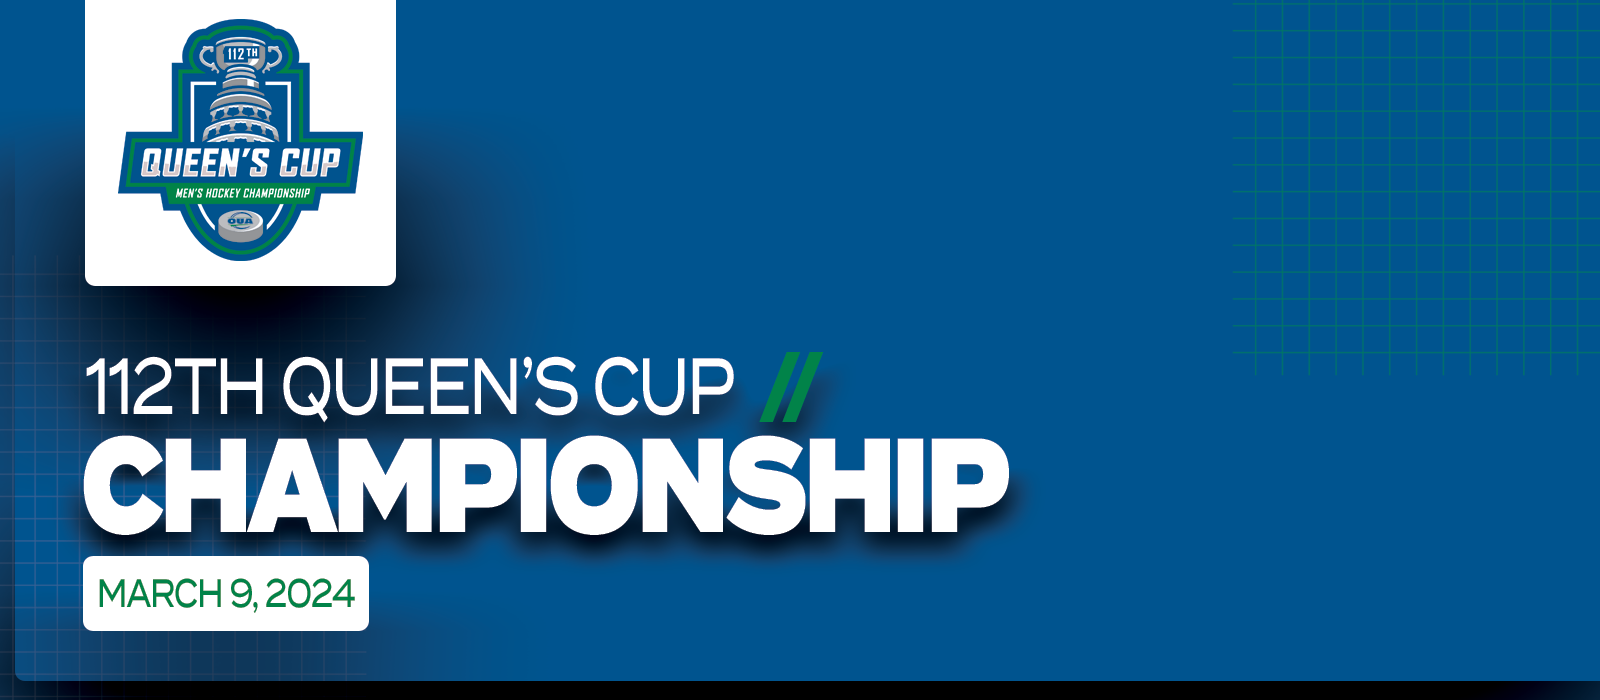 Predominantly blue graphic with large white text on the left side that reads 112th Queen’s Cup Championship, March 9, 2024’ beneath the OUA 112th Queen’s Cup Men’s Hockey Championship logo